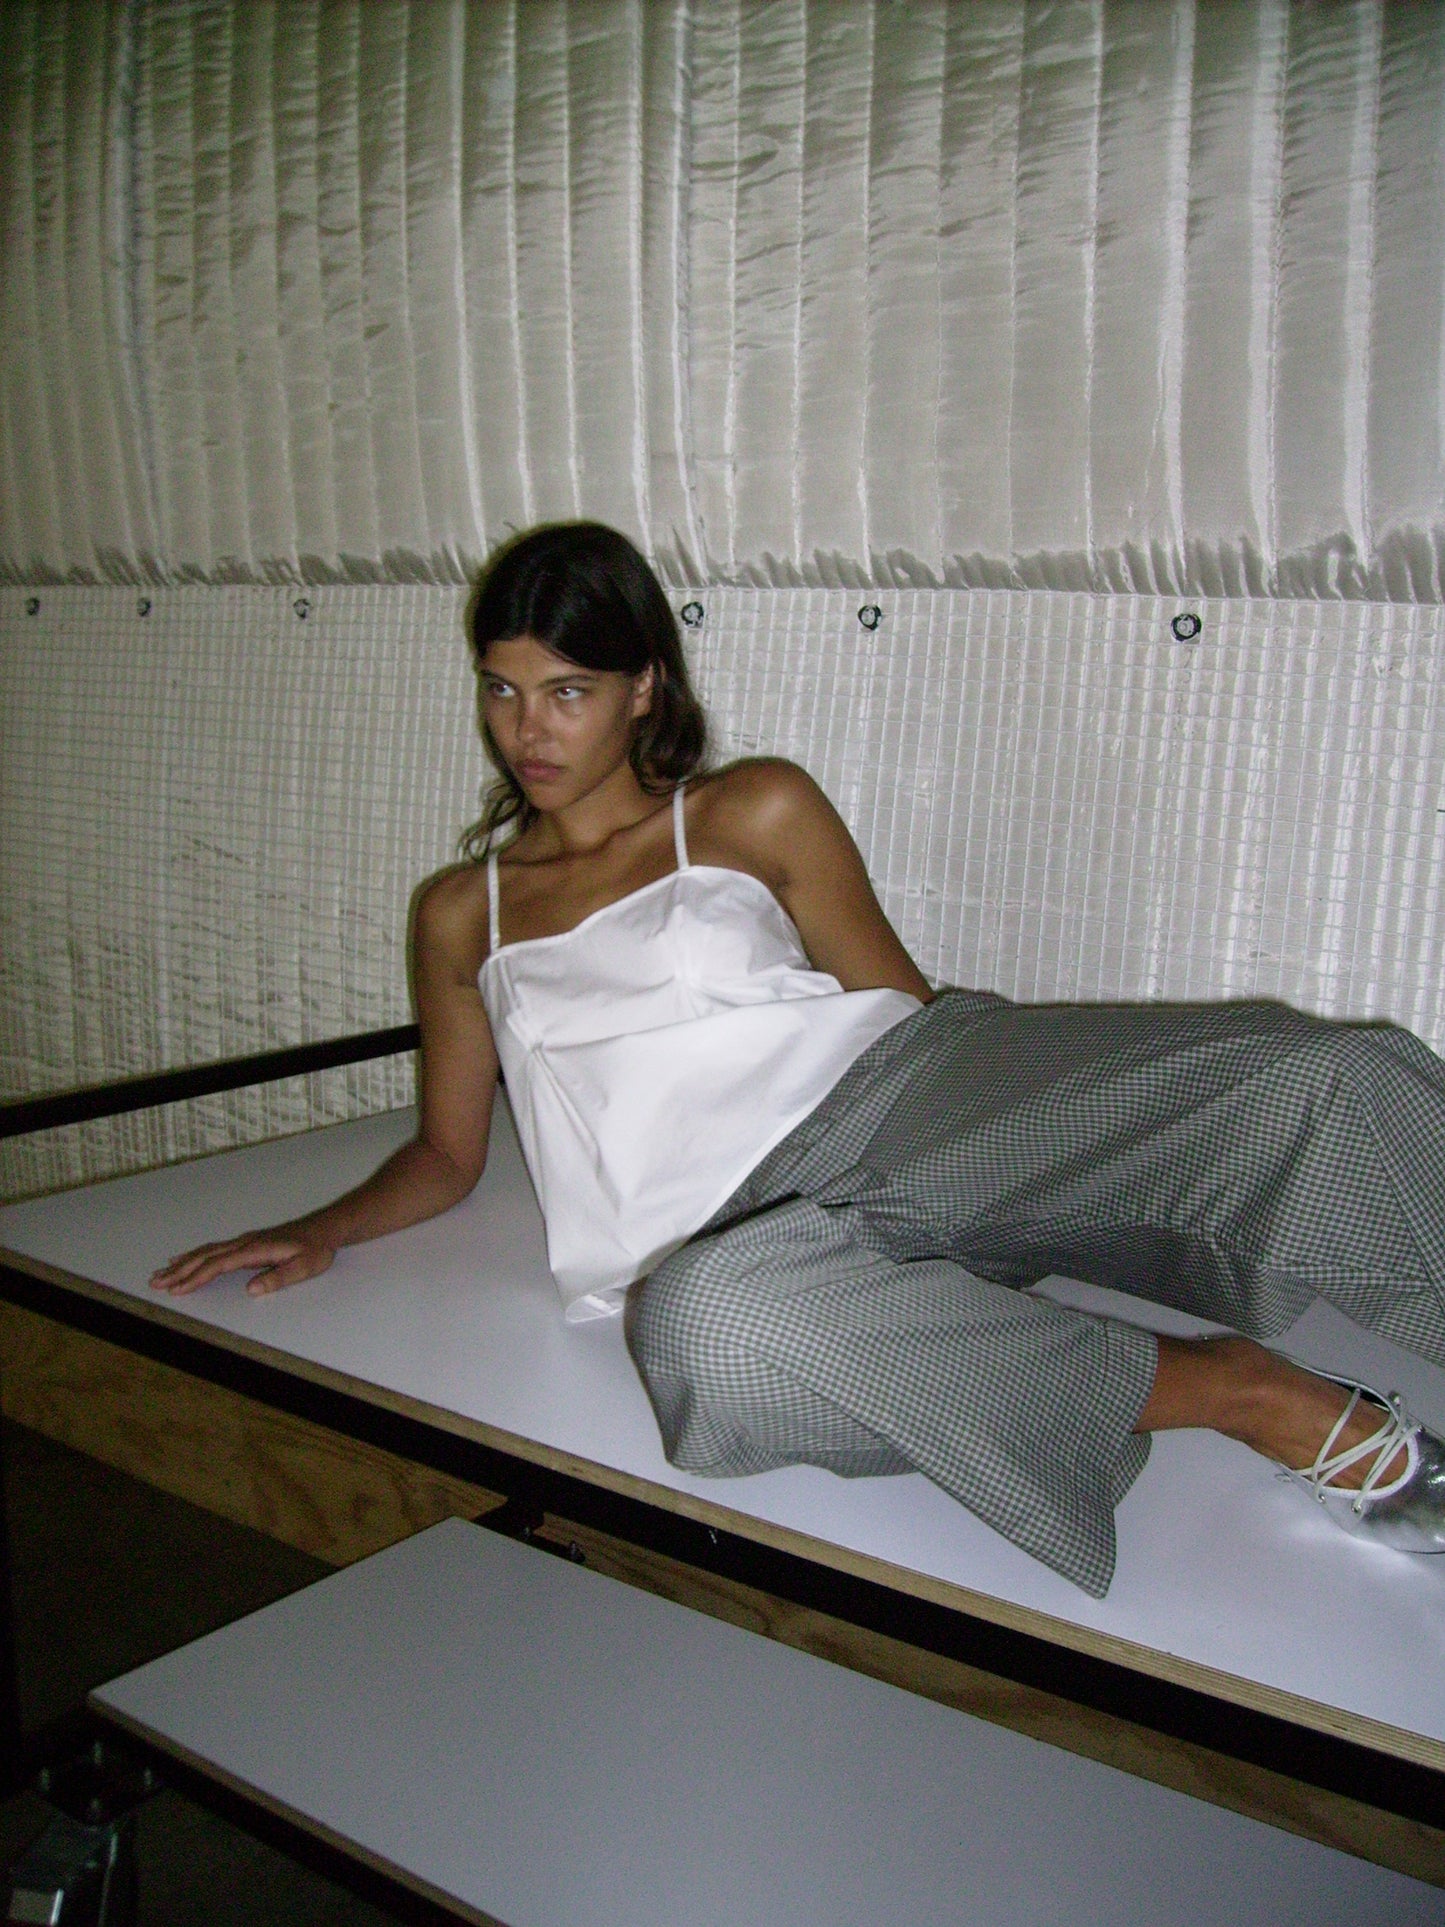 Female model laying on table wearing Pleat Top - White by Deiji Studios against plain background